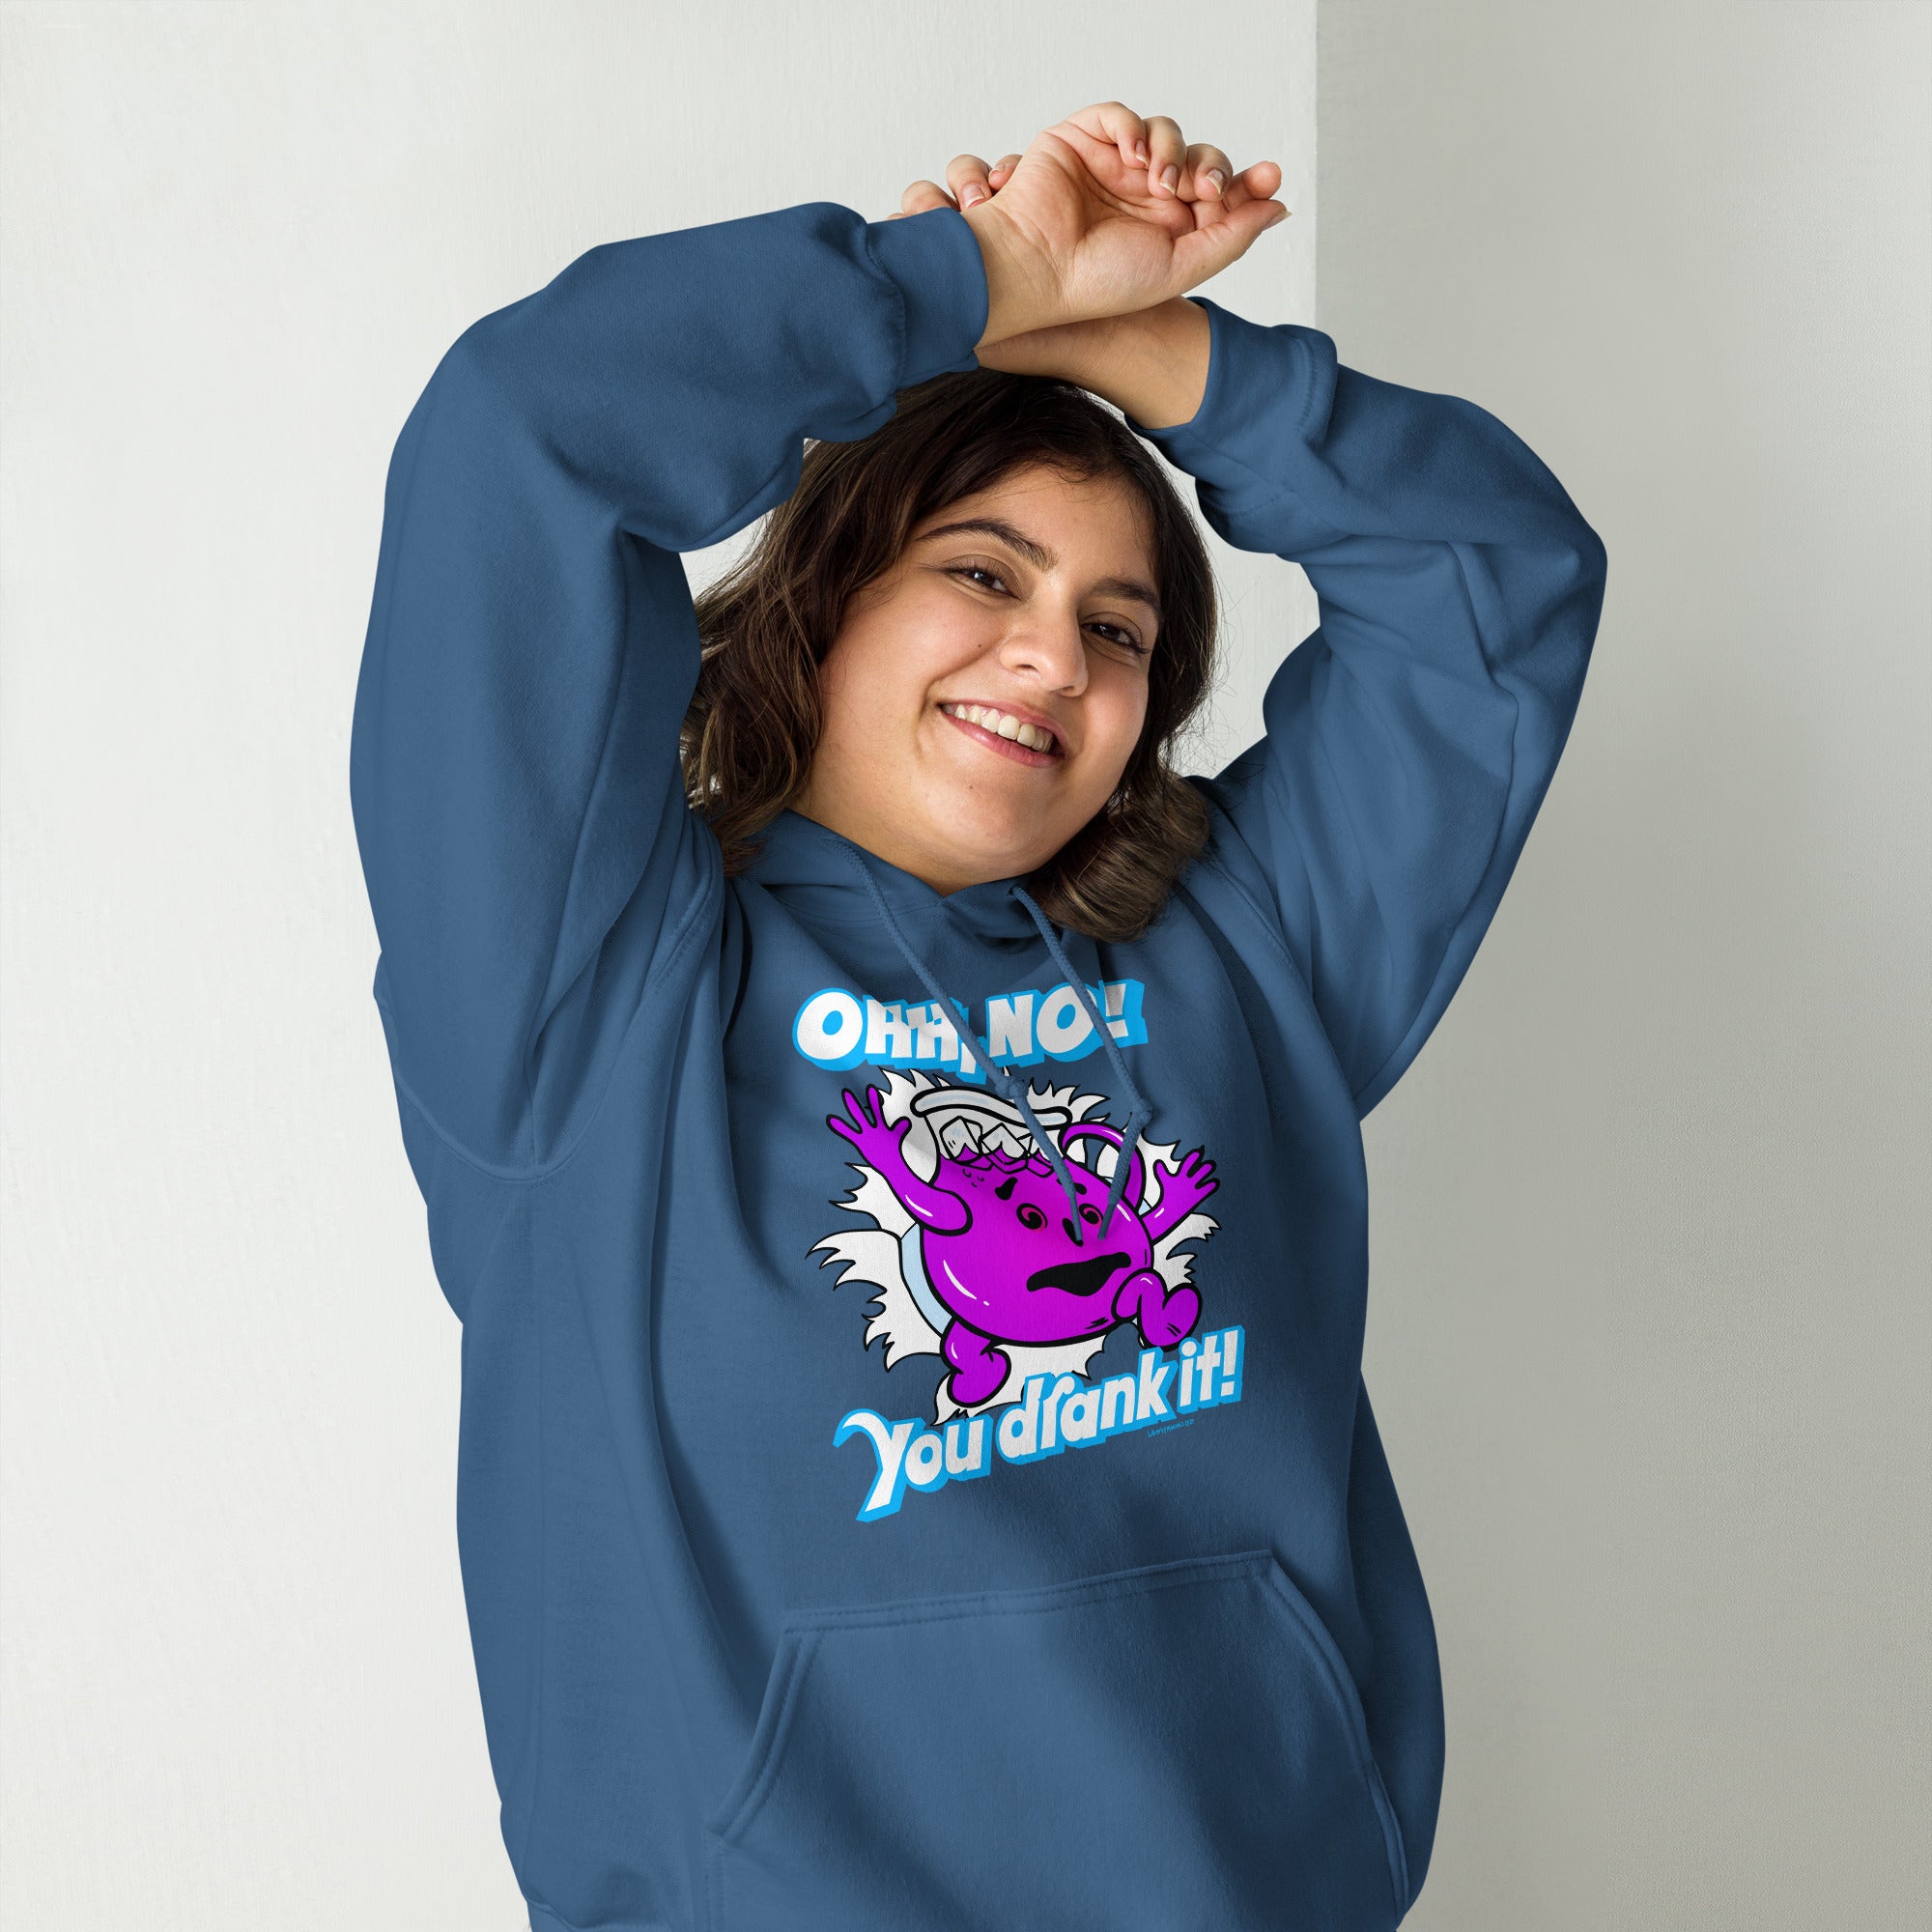 Oh No, You Drank It! Parody Pullover Hoodie